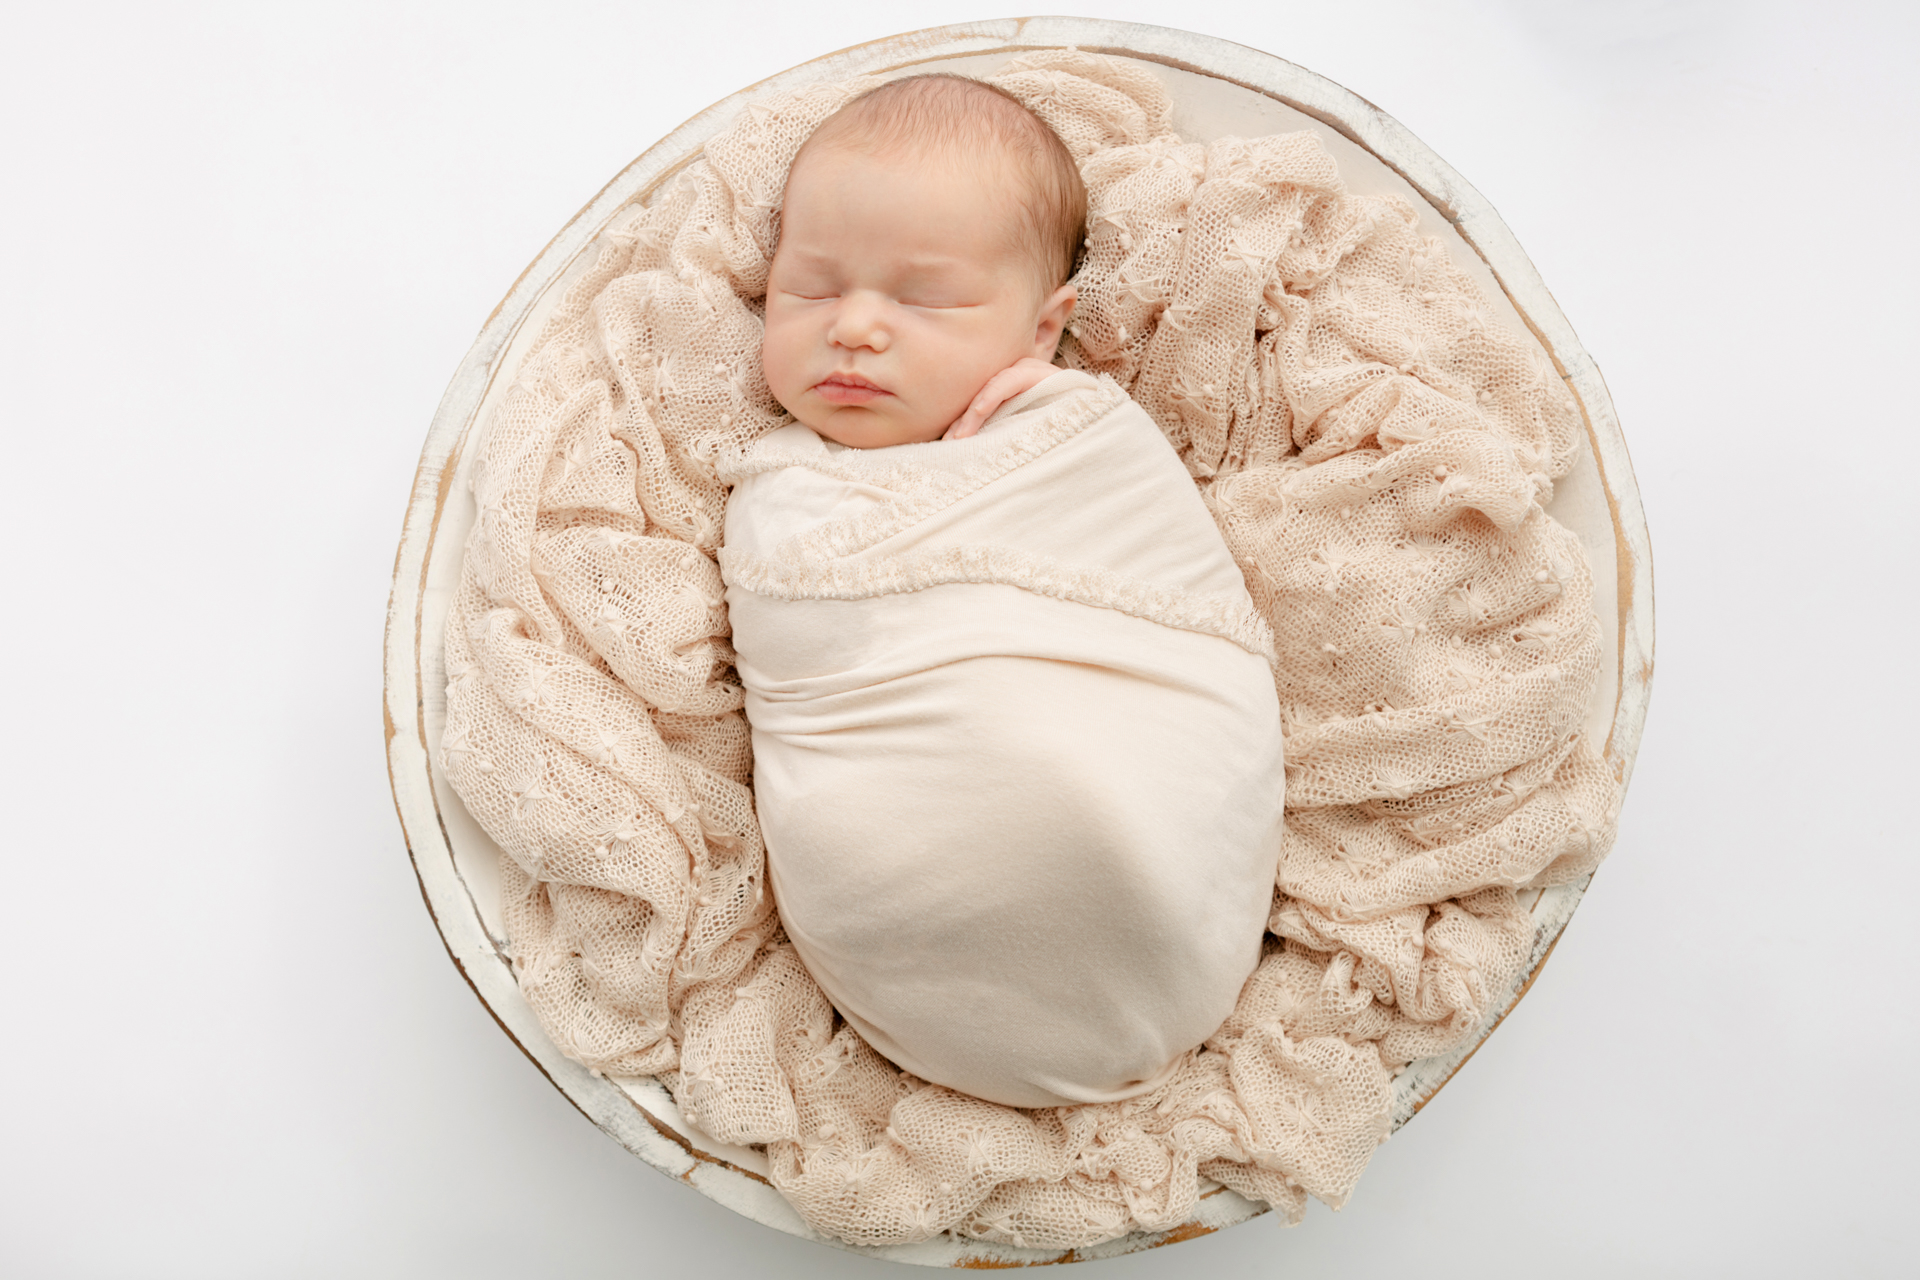 newborn baby girl swaddled in a neutral lace-trim swaddle, asleep in a large basin bowl